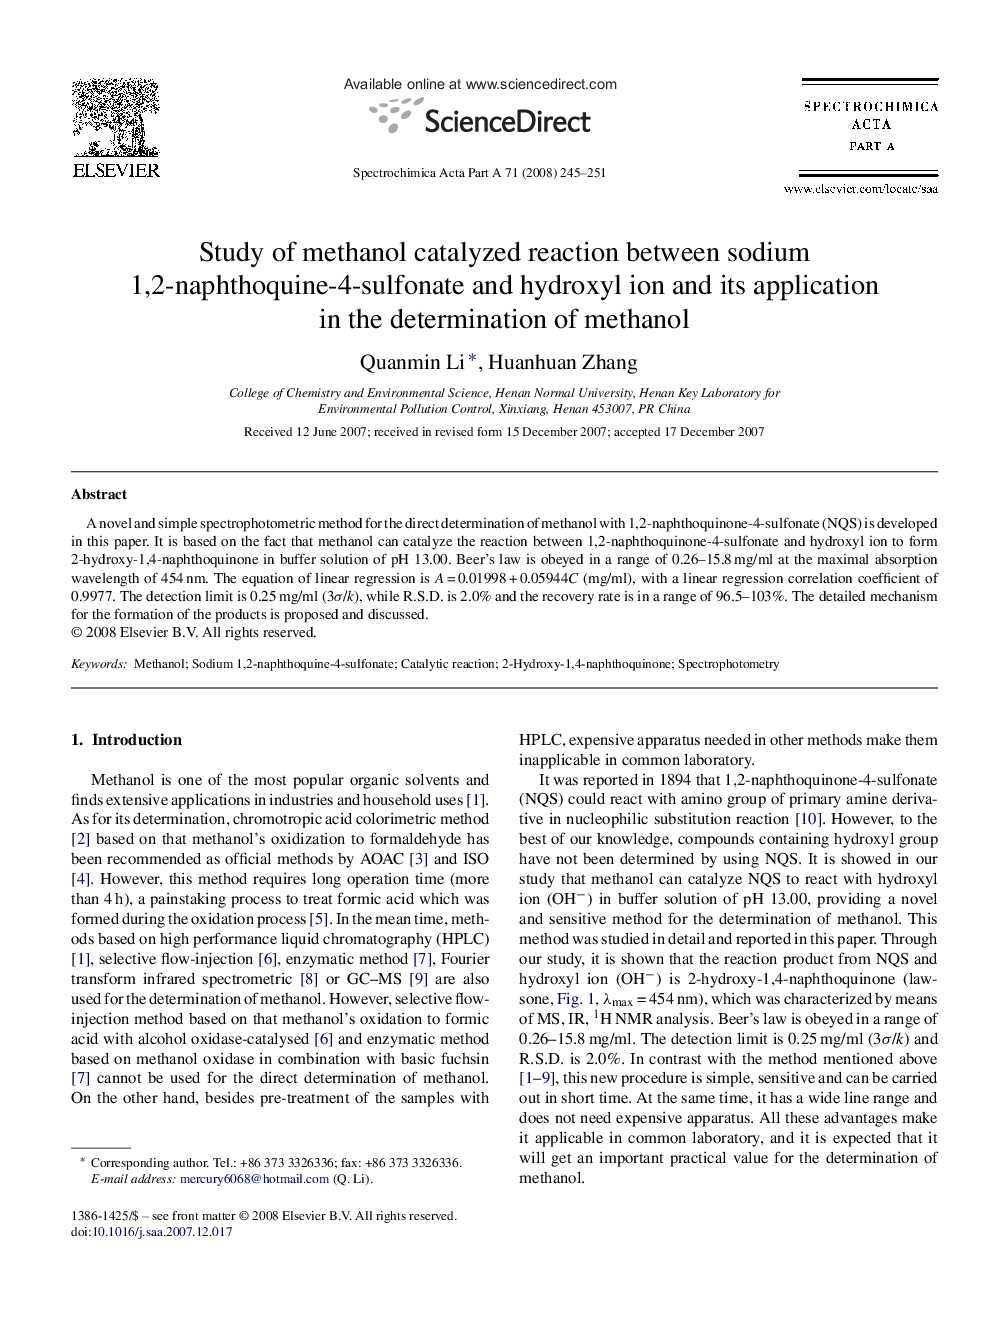 Study of methanol catalyzed reaction between sodium 1,2-naphthoquine-4-sulfonate and hydroxyl ion and its application in the determination of methanol